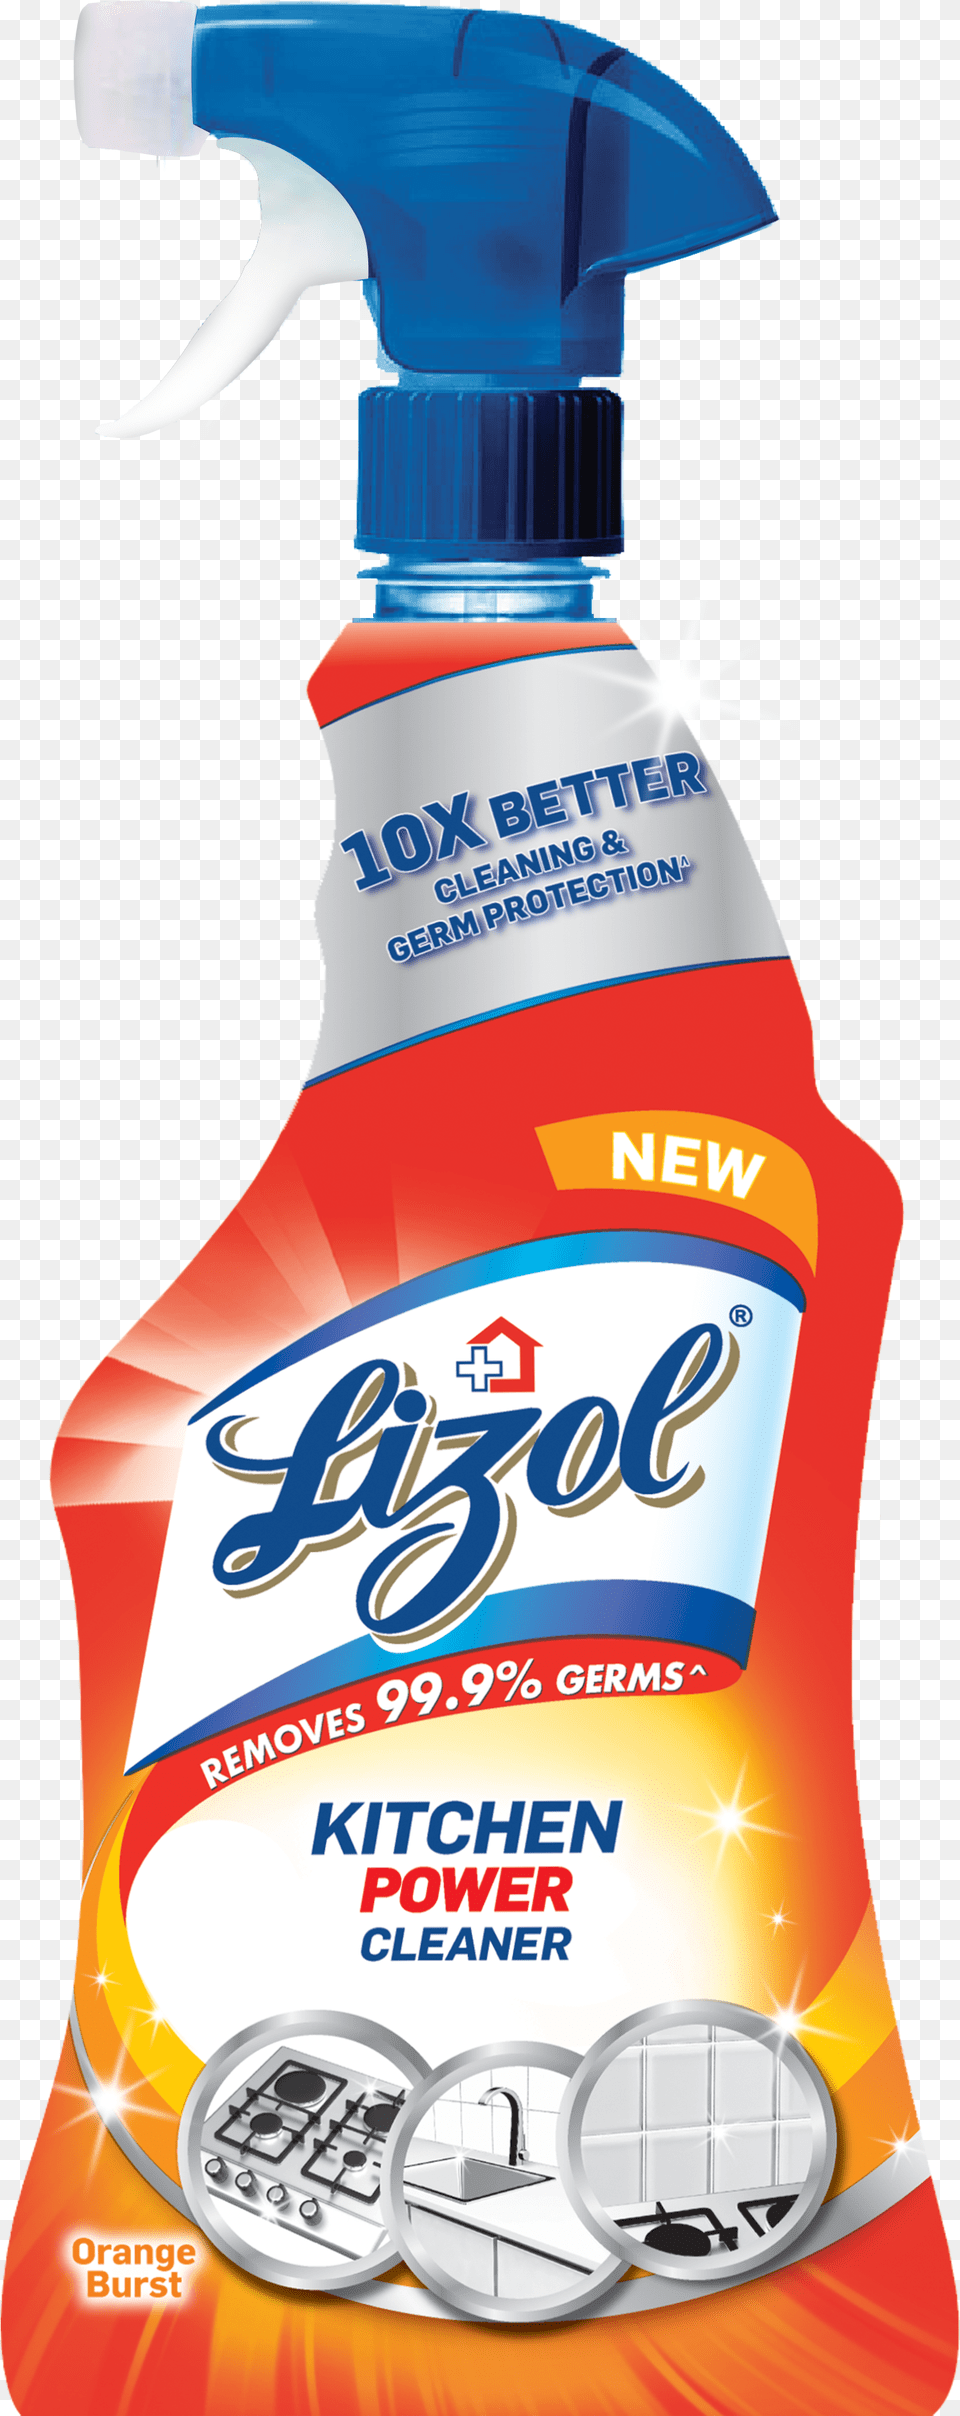 Lizol Kitchen Power Cleaner, Food, Ketchup, Bottle, Cleaning Free Png